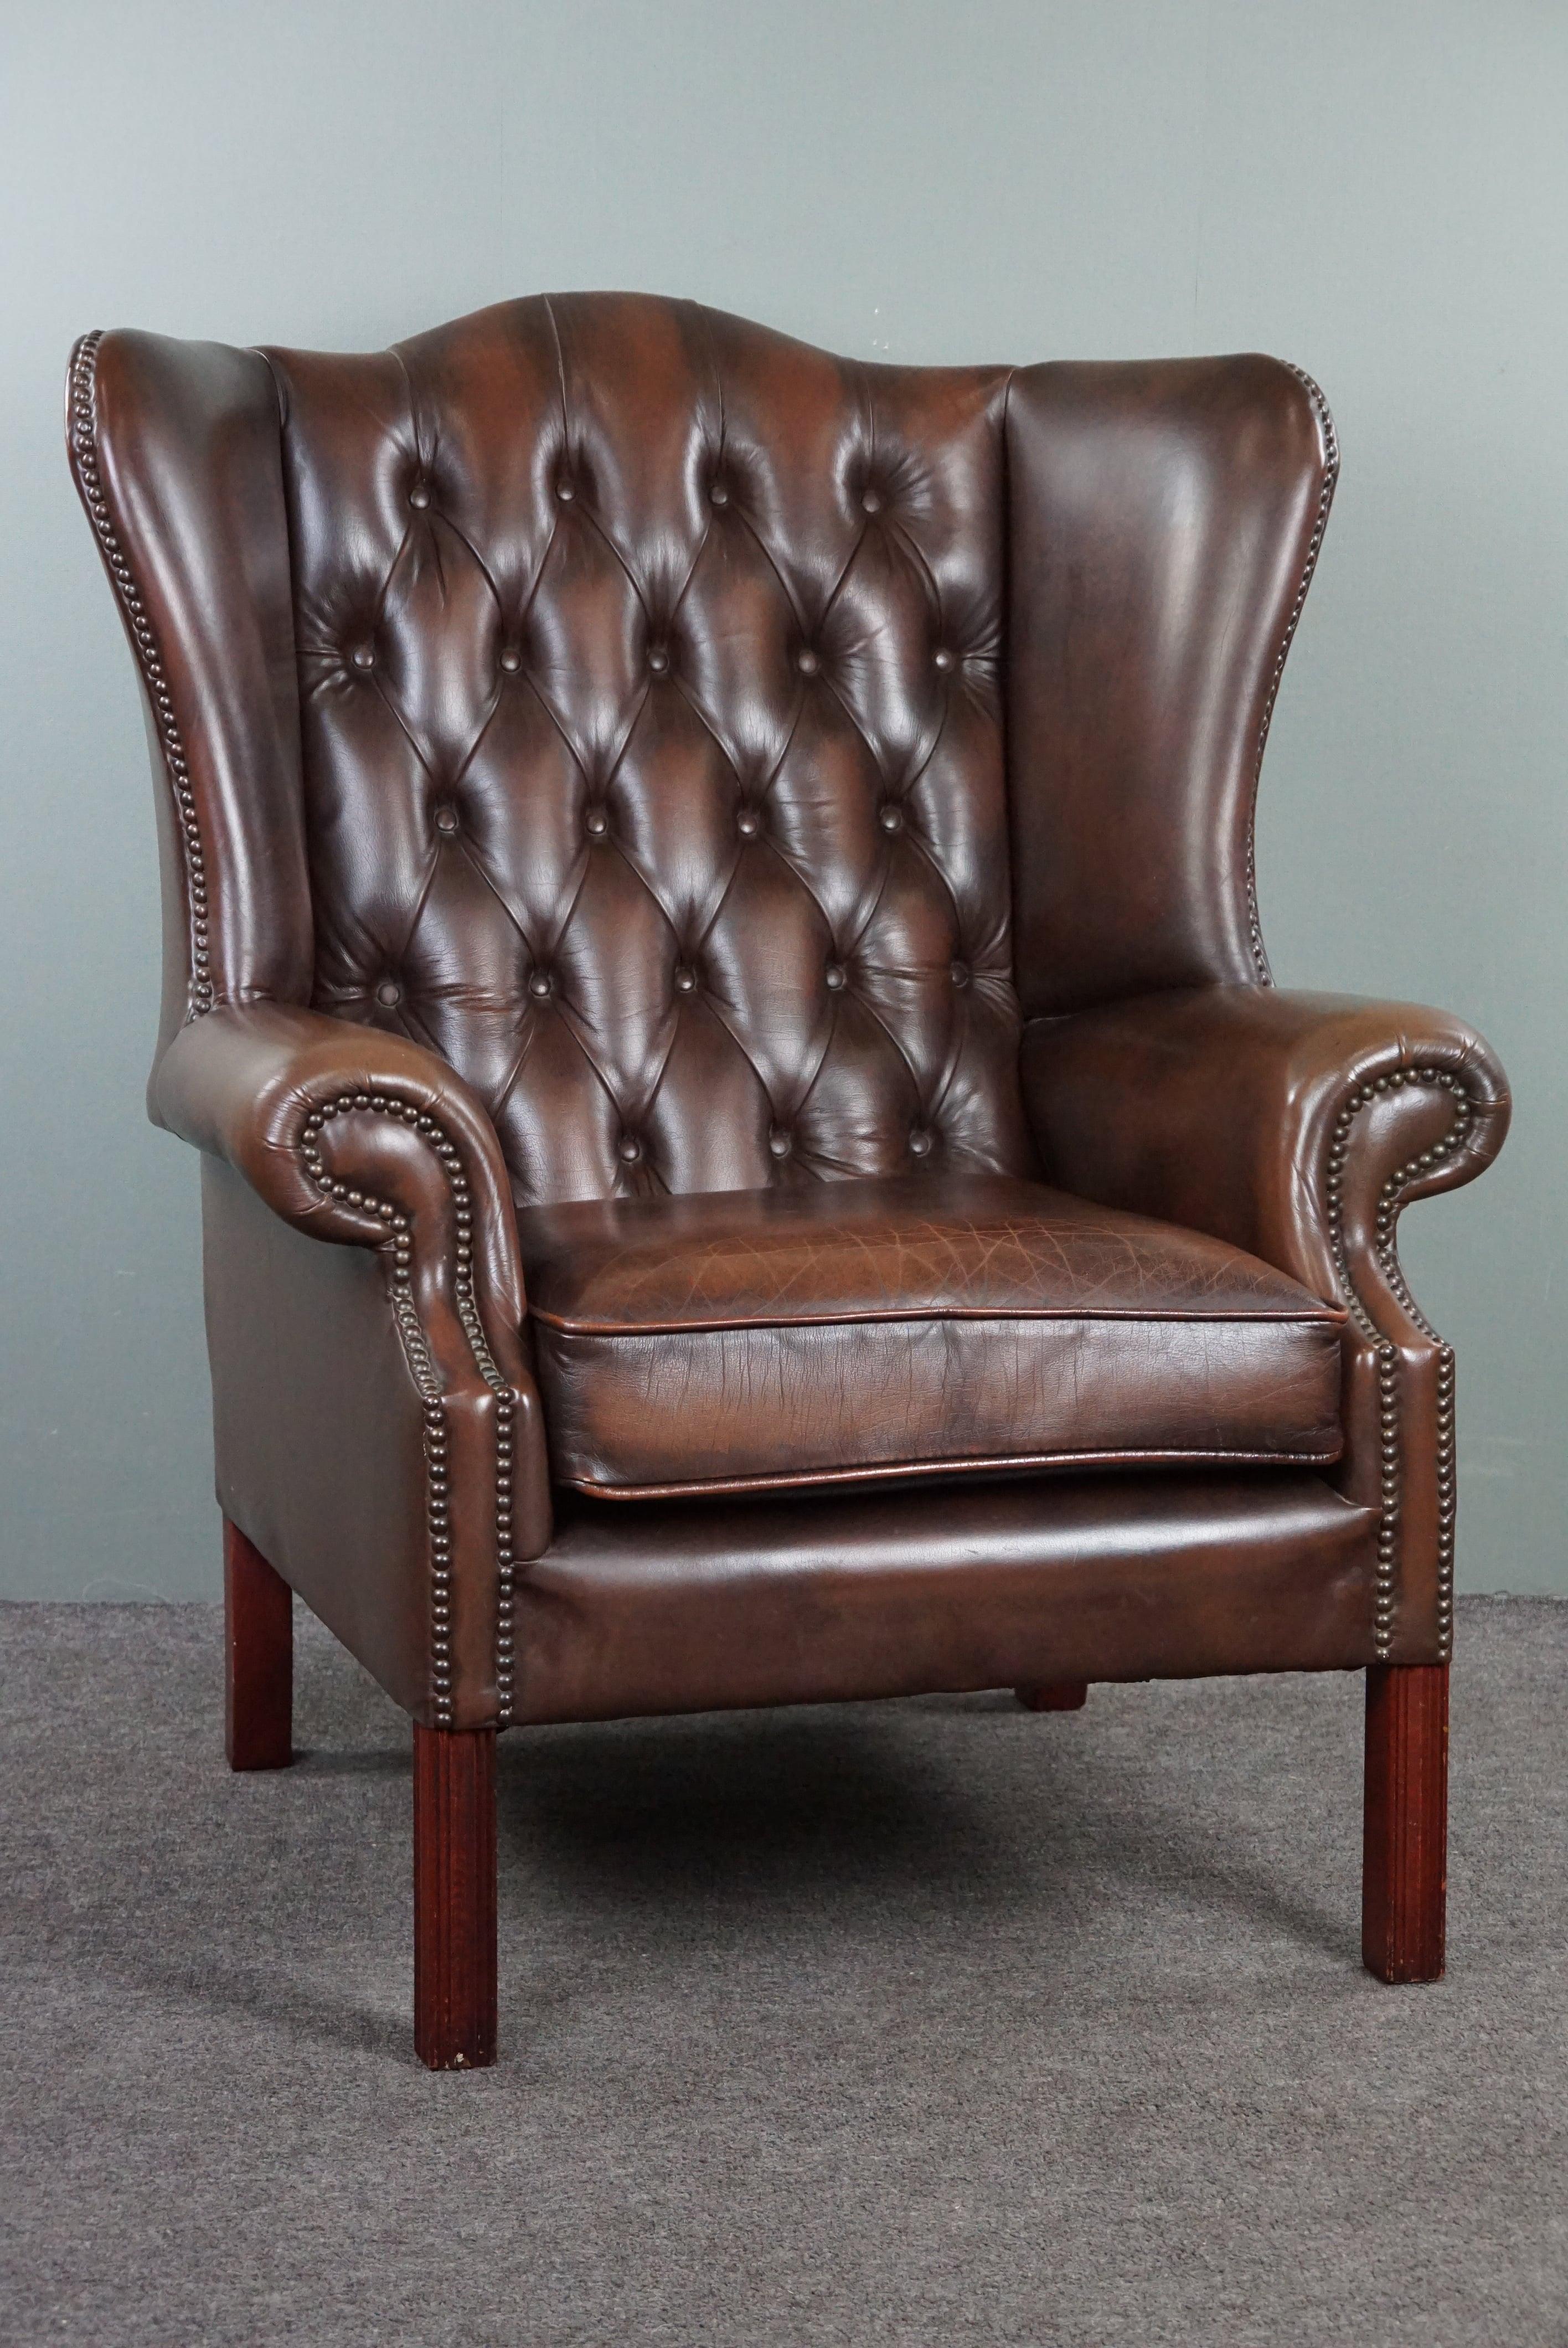 With pride we offer you this fantastic Chesterfield wingback armchair.
This armchair offers an exceptionally high-quality seating experience, and the combination of the leather, decorative nails, and wooden legs make it a true eye-catcher. The